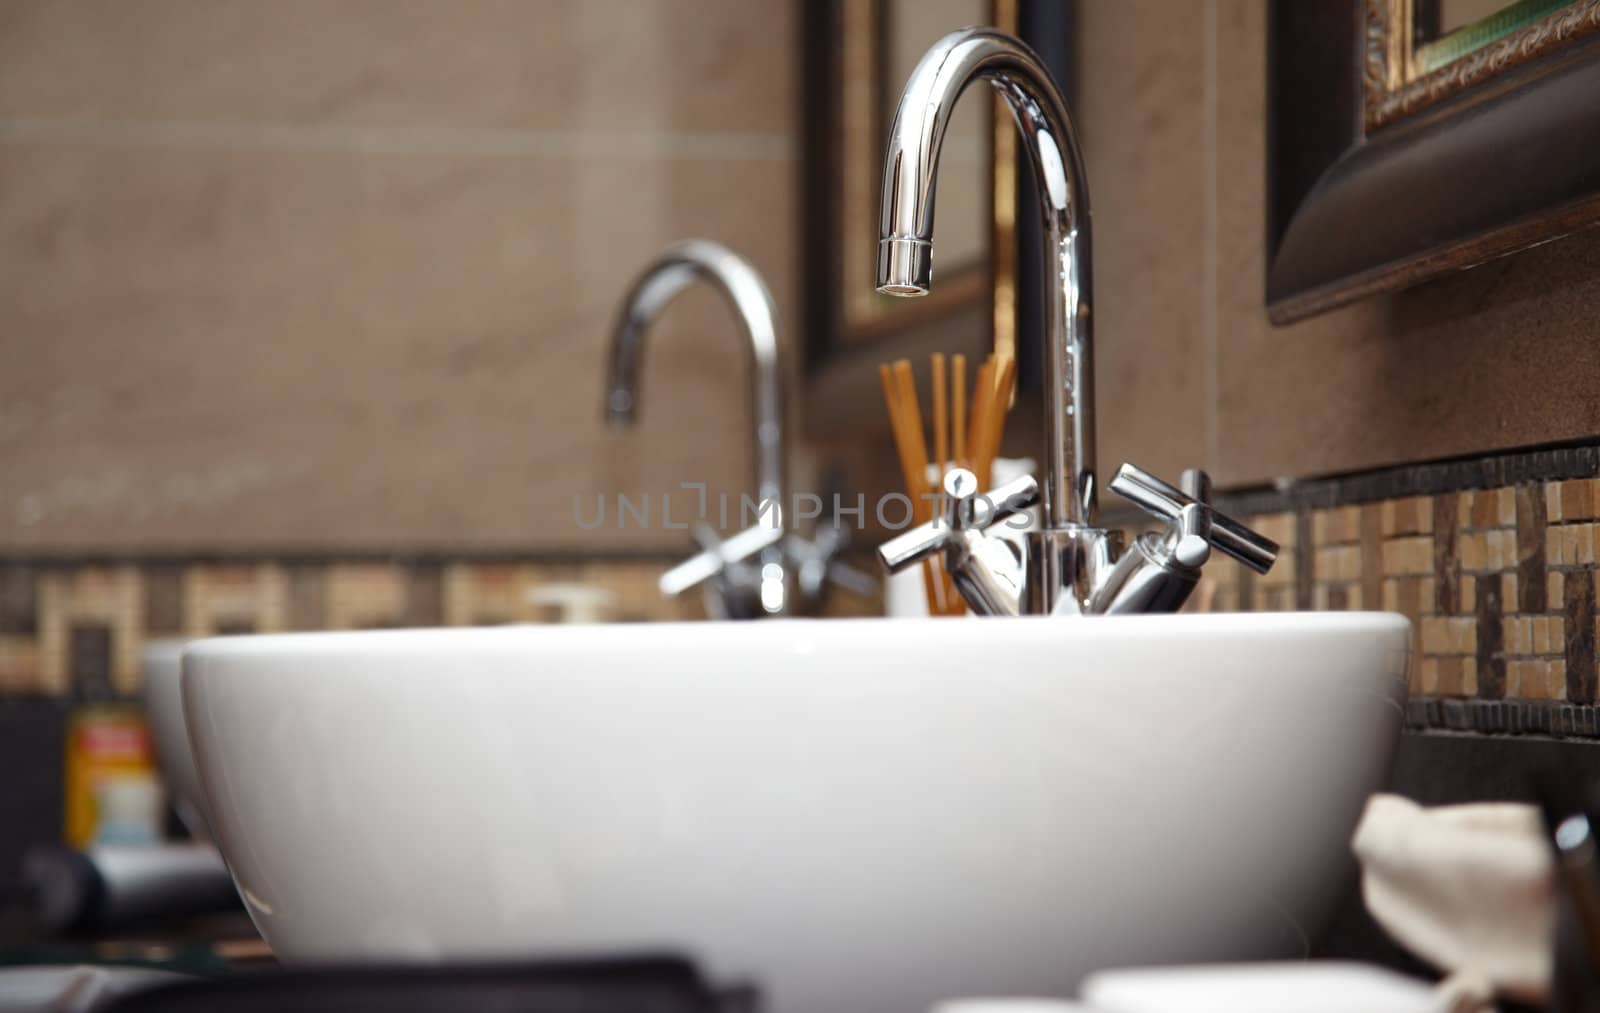 Close-up photo of chrome sink with taps